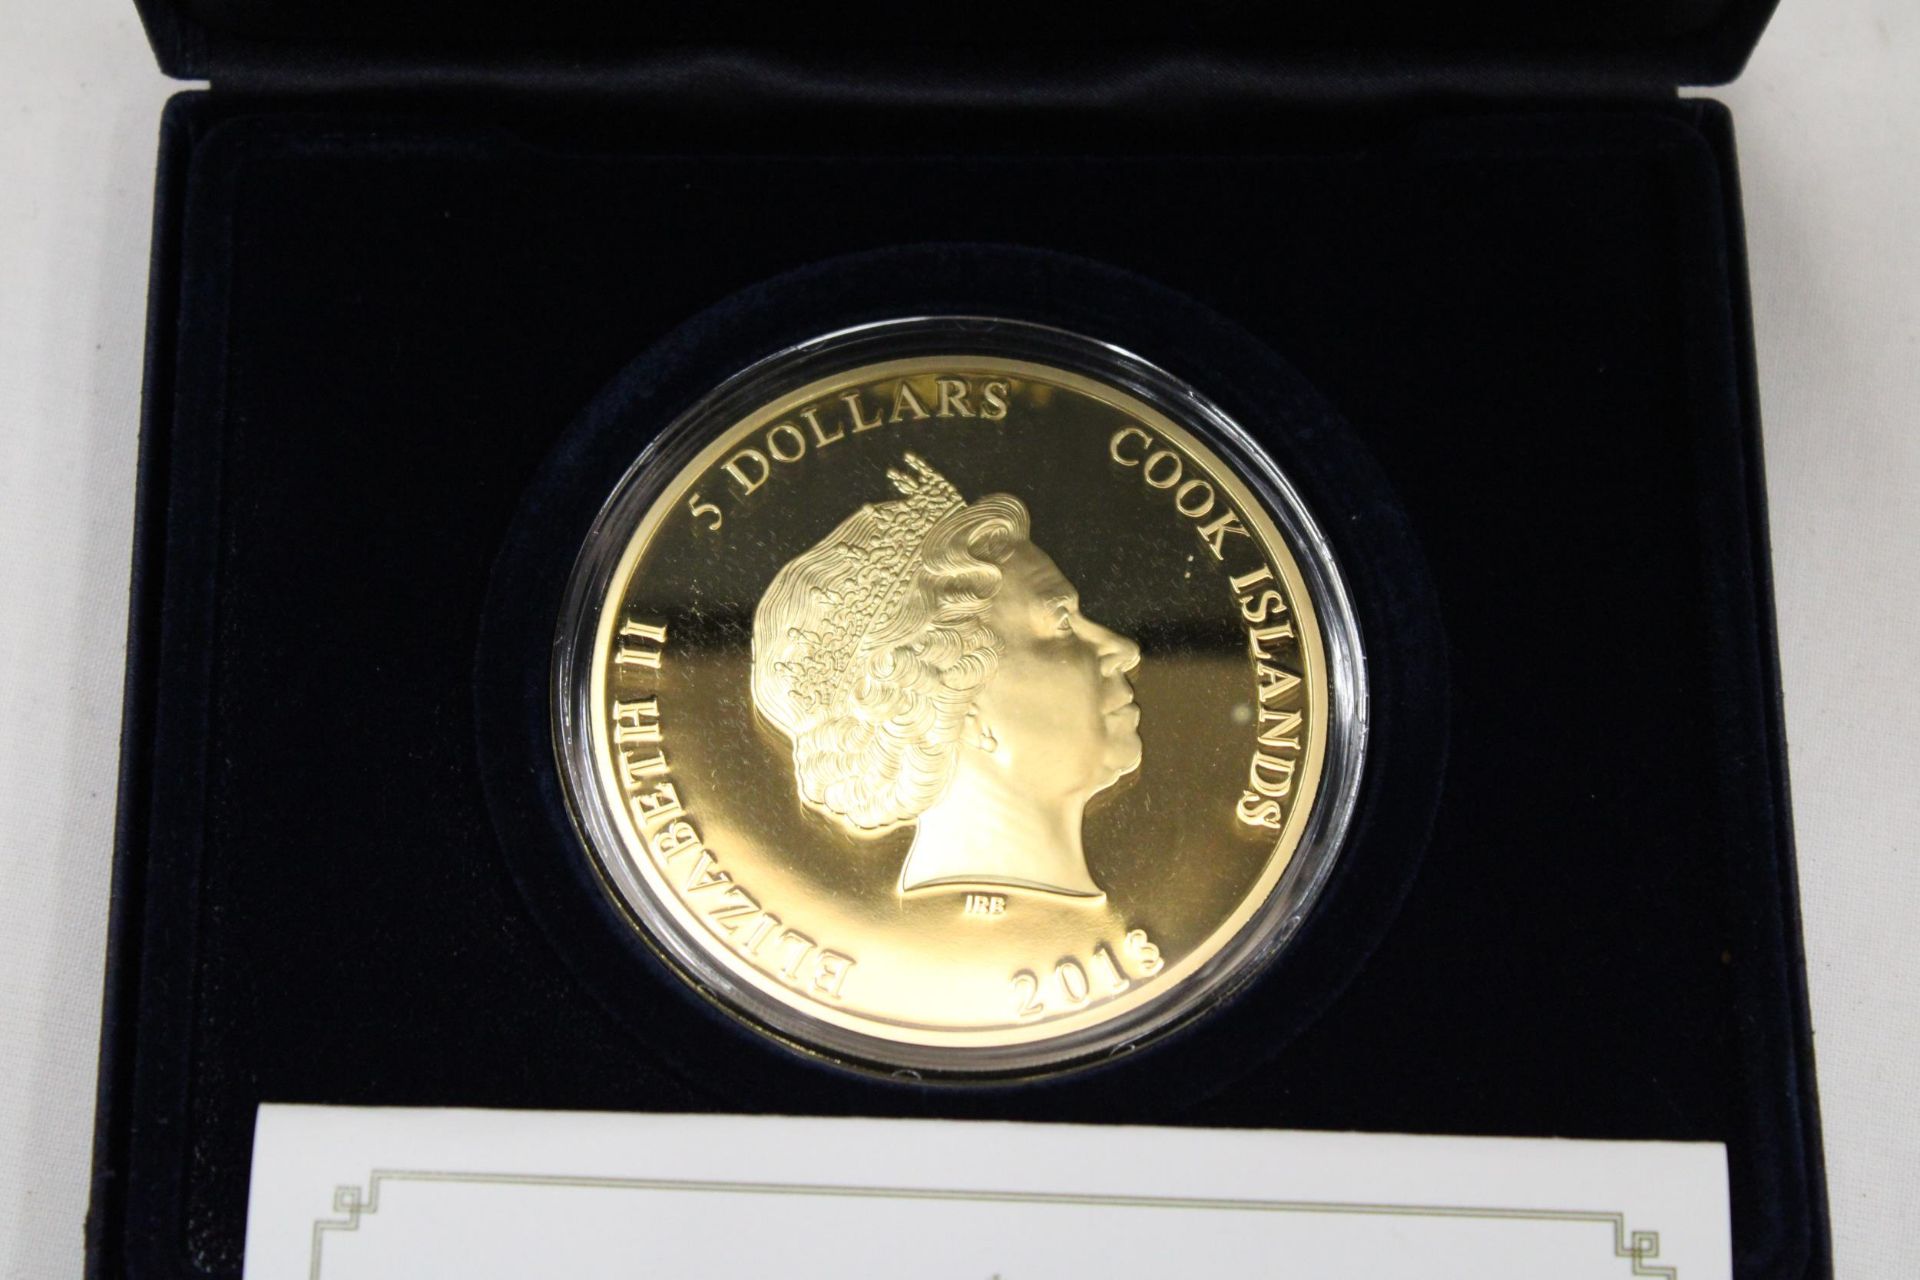 A BOXED 2013 CORONATION JUBILEE 65MM COIN WITH CERTIFICATE OF AUTHENTICITY - Image 2 of 4